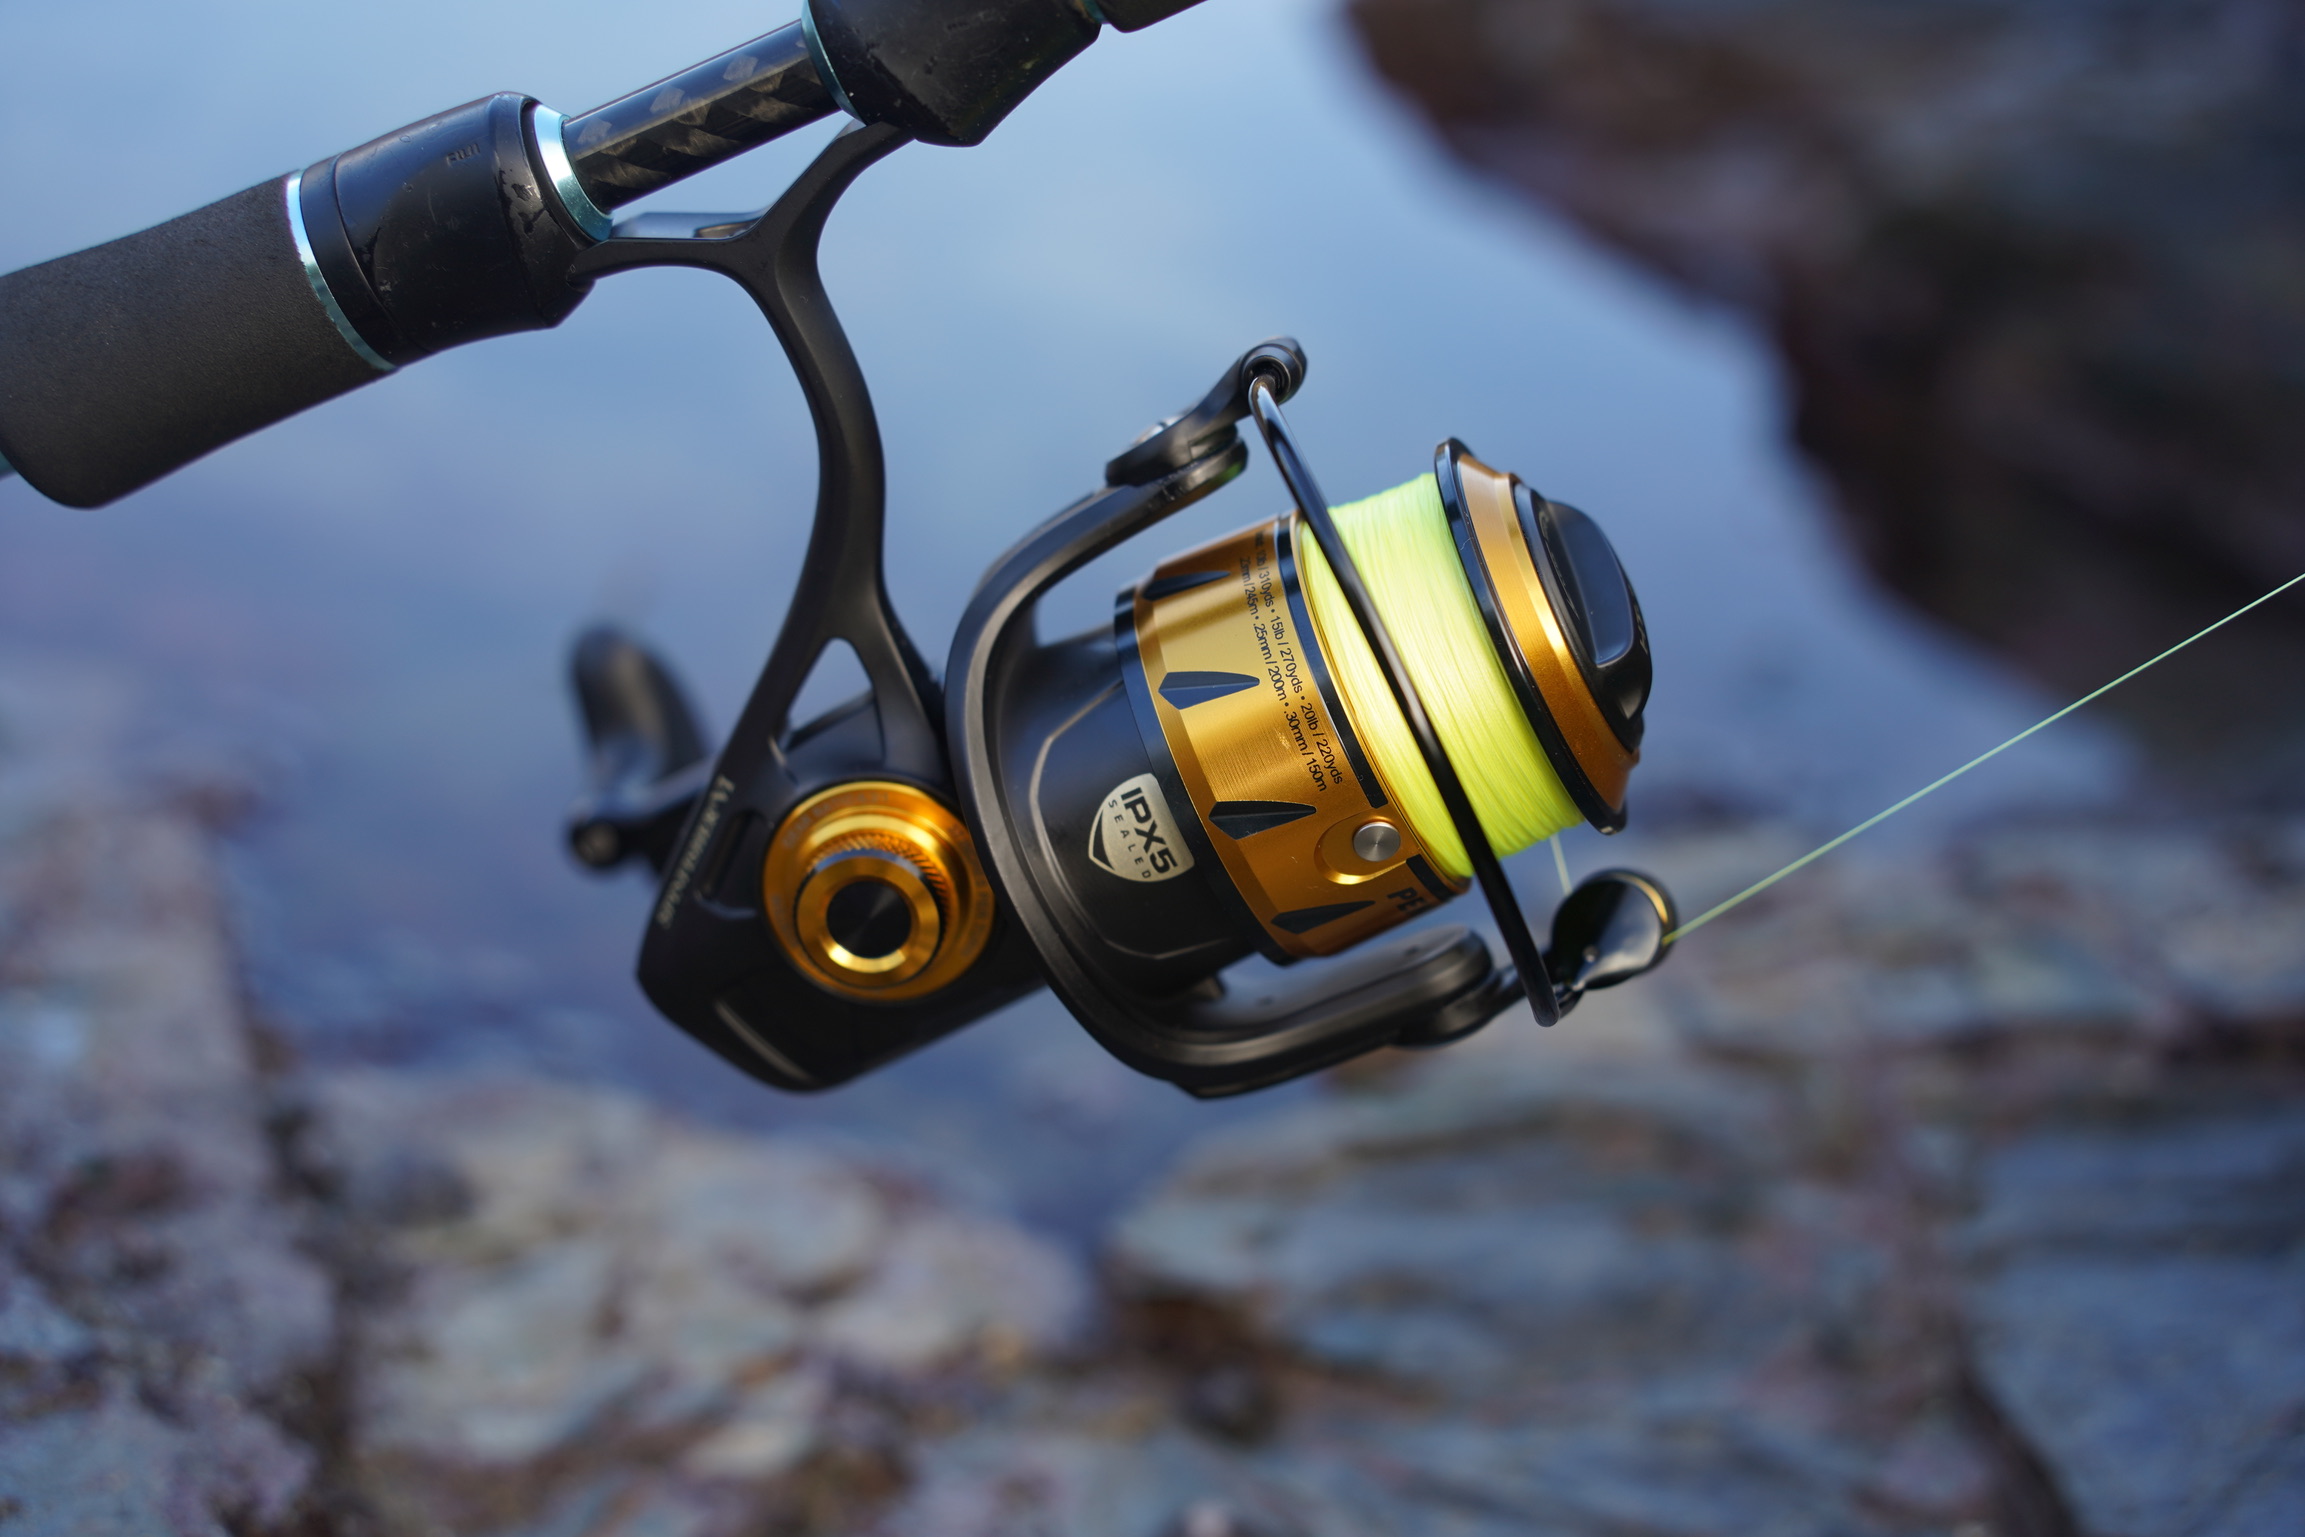 Penn Spinfisher Review